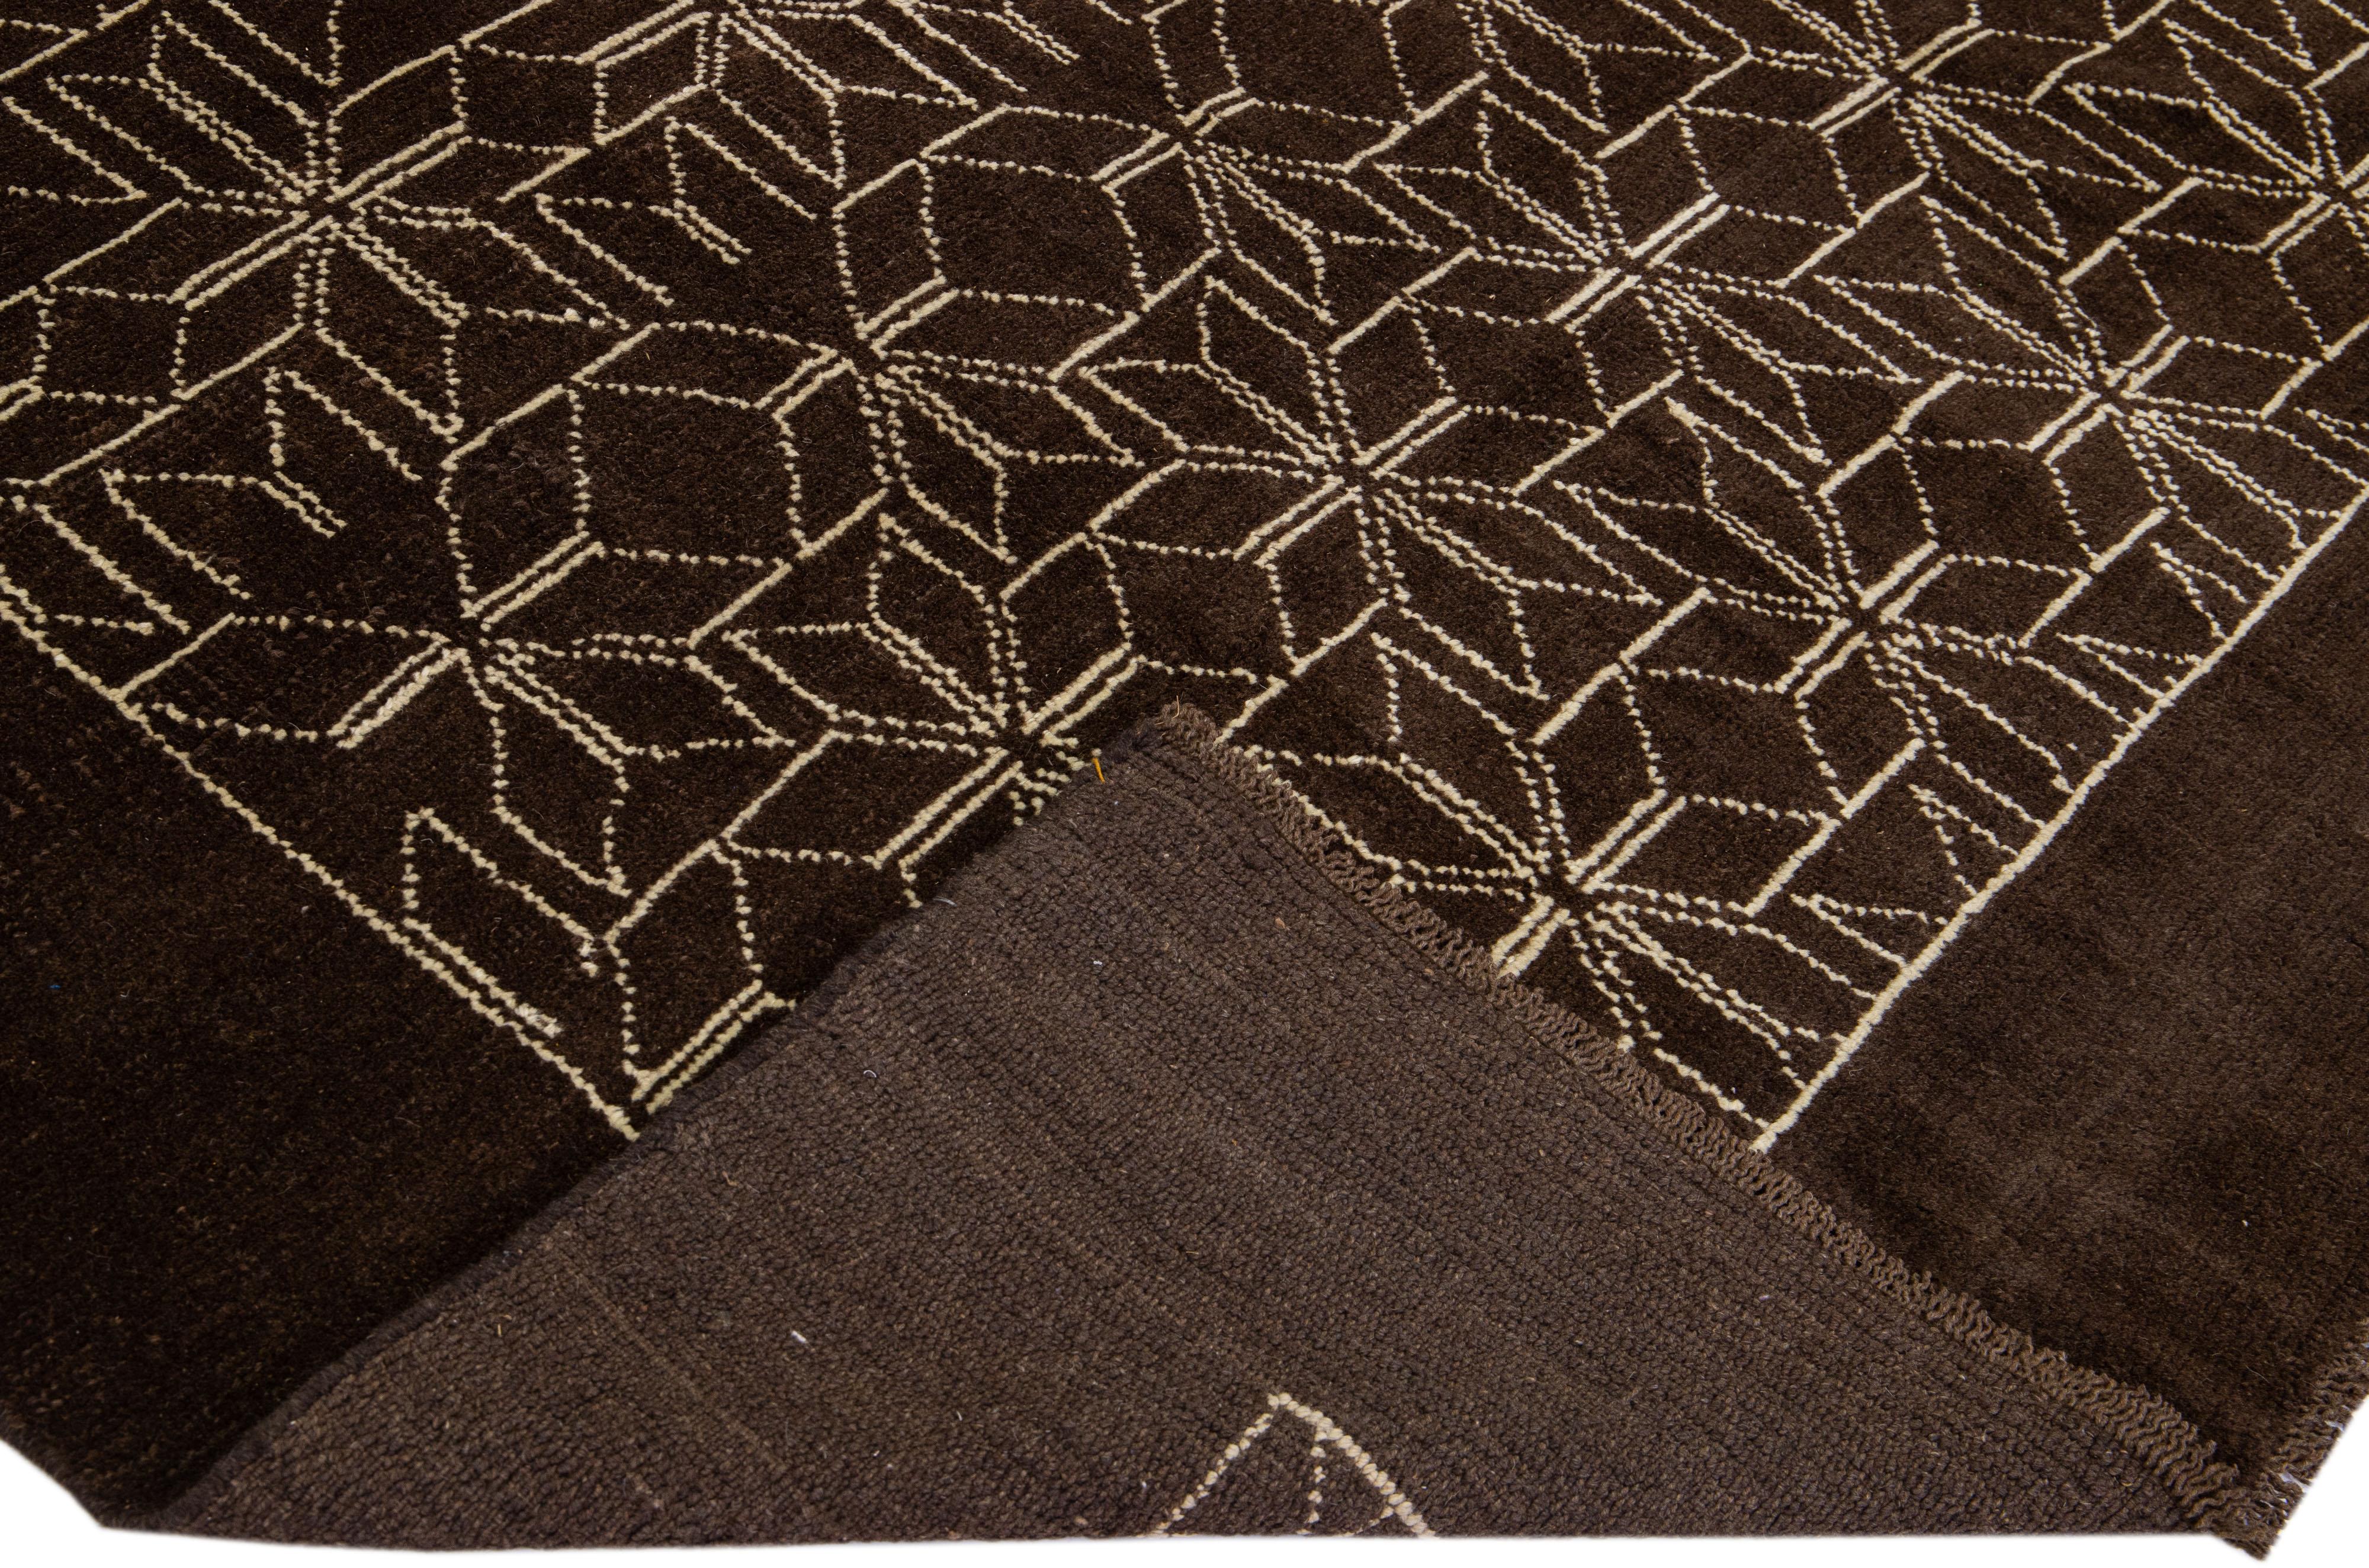 This Beautiful Moroccan-style handmade wool rug makes part of our Northwest collection and features a dark brown color field and beige accents in a gorgeous geometric tribal design.

This rug measures: 7' x 9'2